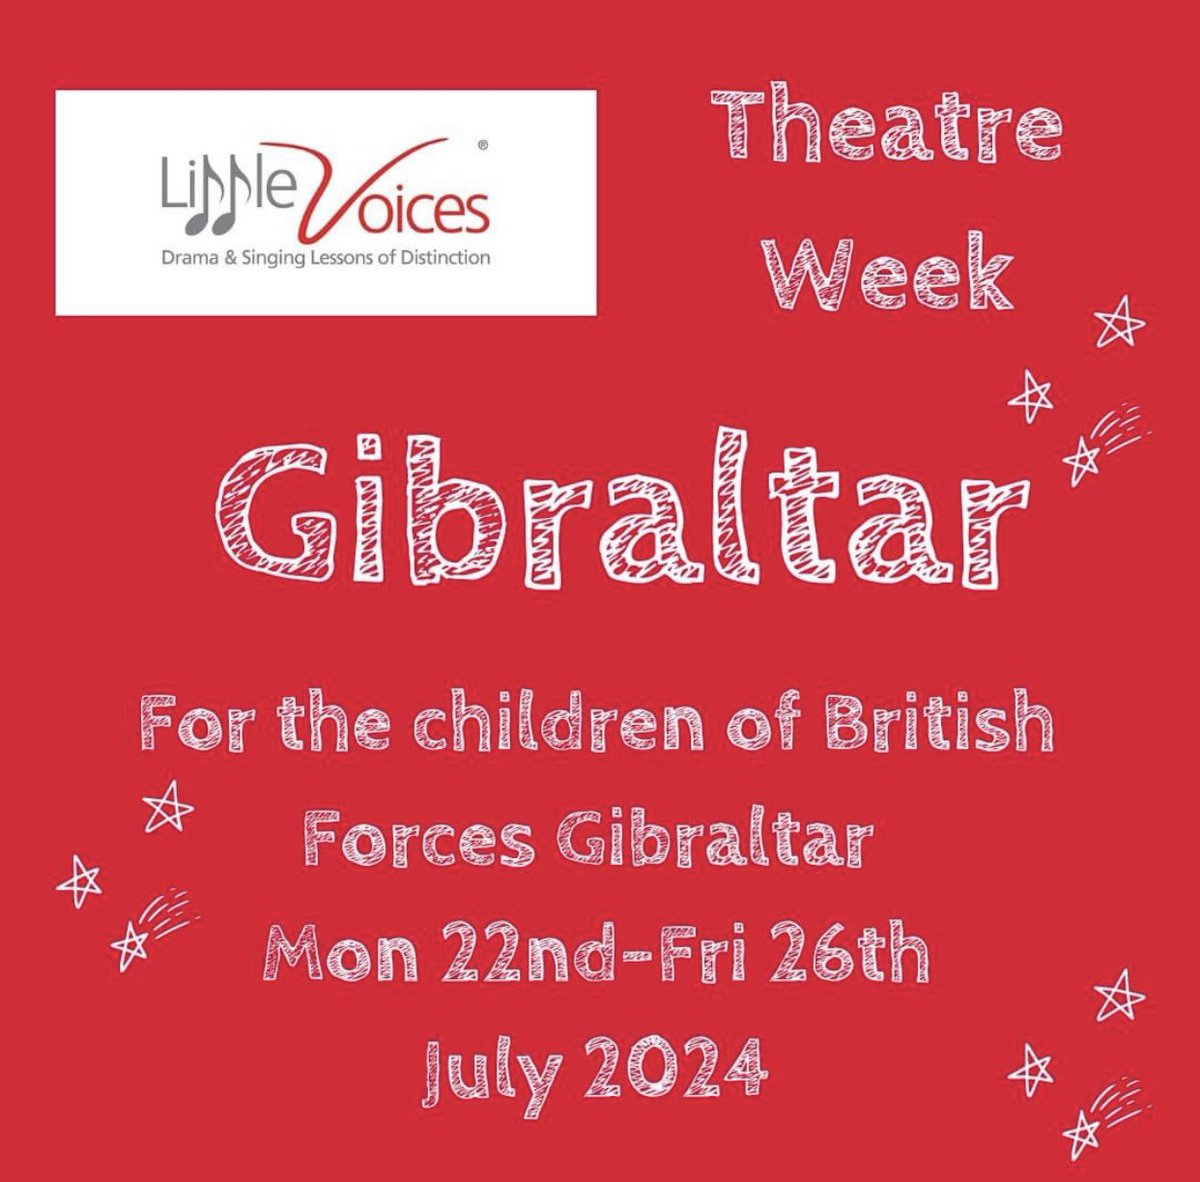 Little Voices - ensuring children from all walks of life get the chance to shine and have the magical Little Voices experience 🥰🎵🎭🥰
#gibraltar #britishforcesgibraltar #militarylife #britishforces #littlevoices #forallchildren #theatreweek #magical #shine #summerholidays